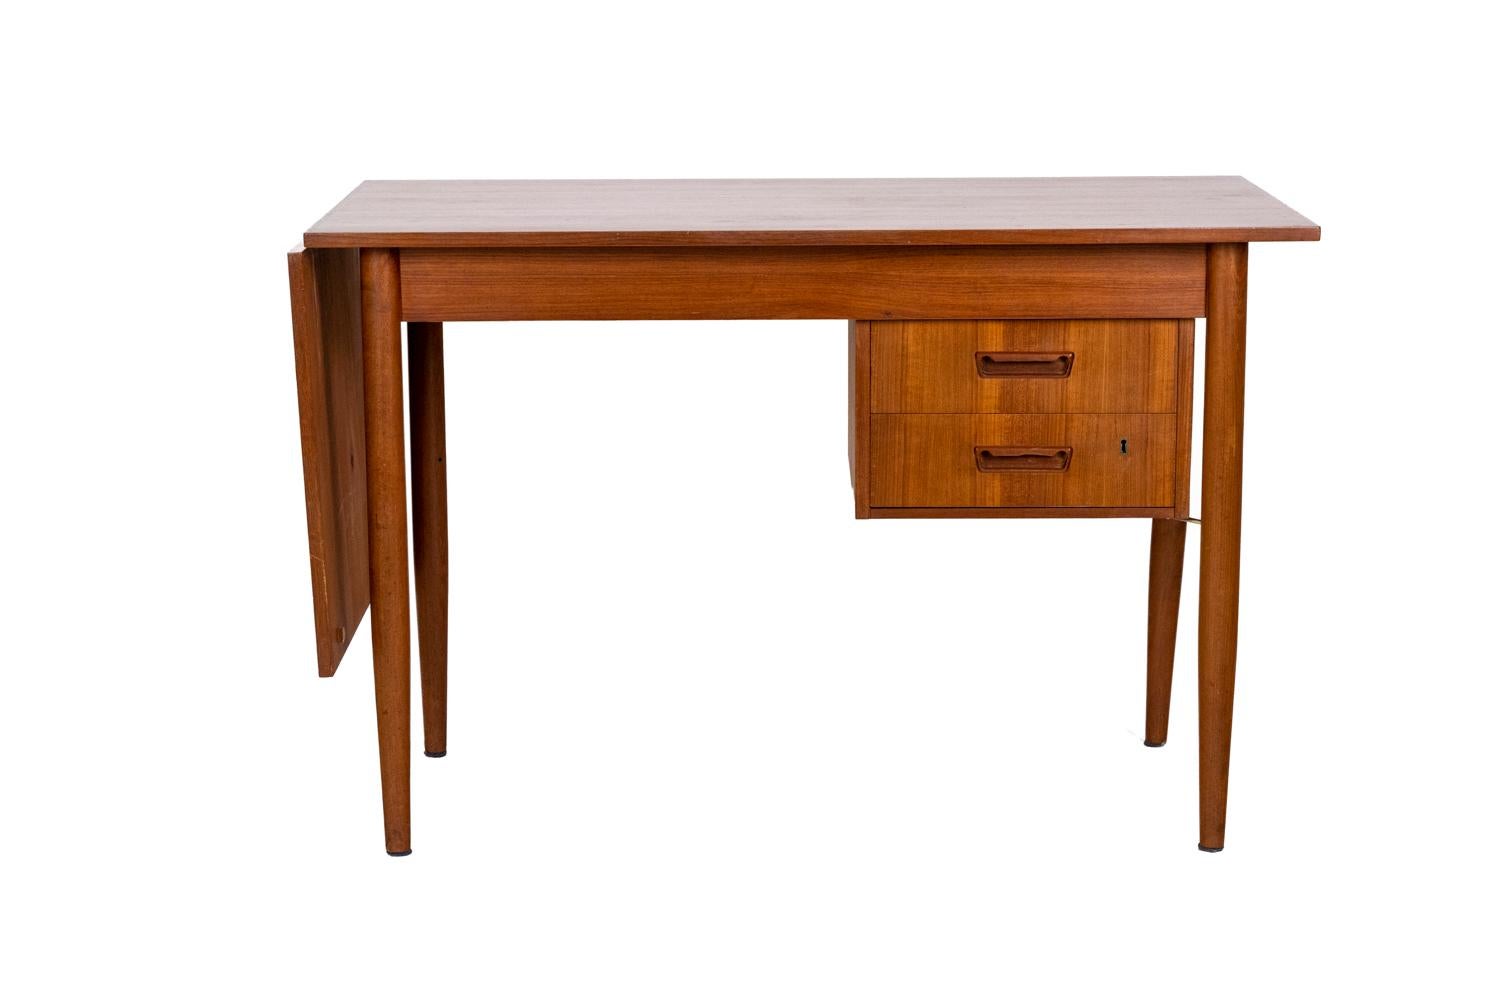 Gunnar Nielsen Tibergaard, attributed to. 

Desk in teak, rectangular in shape and with an extending top standing on a box made up of two drawers, with its teak chair with a curved backrest. Seat covered with white leather. Straight